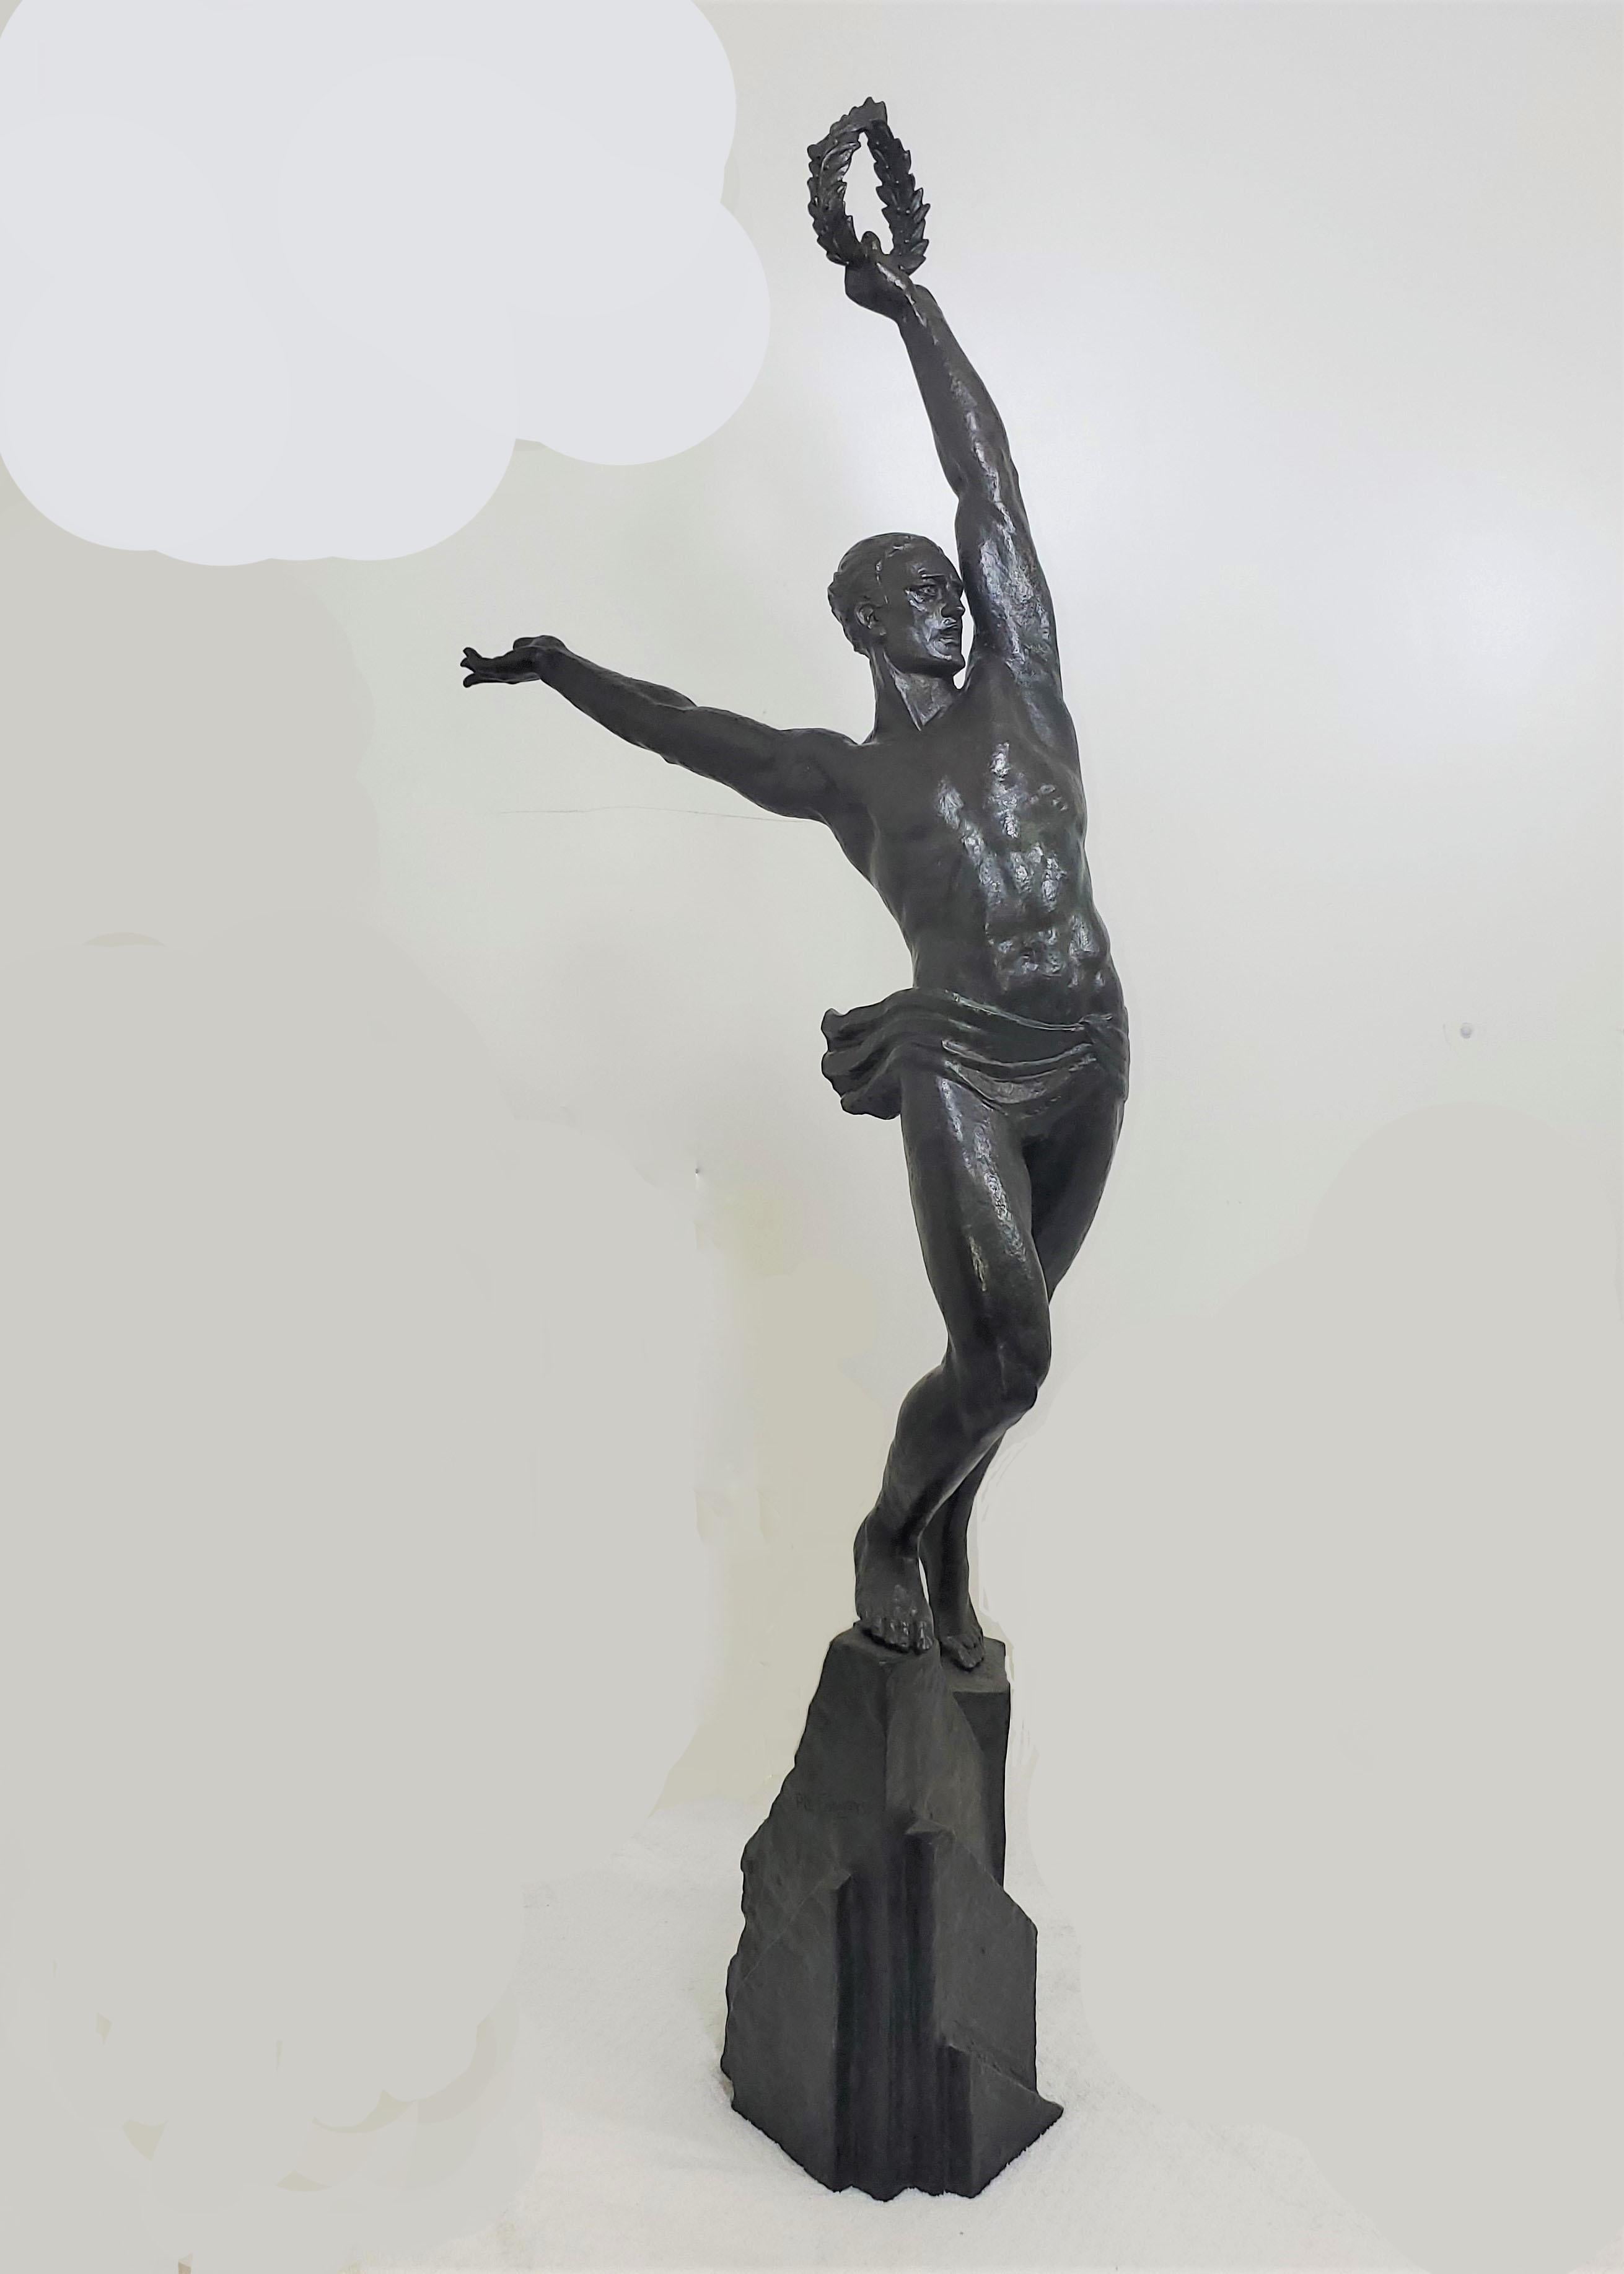 Large Original French Art Deco Bronze of a Semi-Nude Male Athlete by Le Faguays For Sale 16